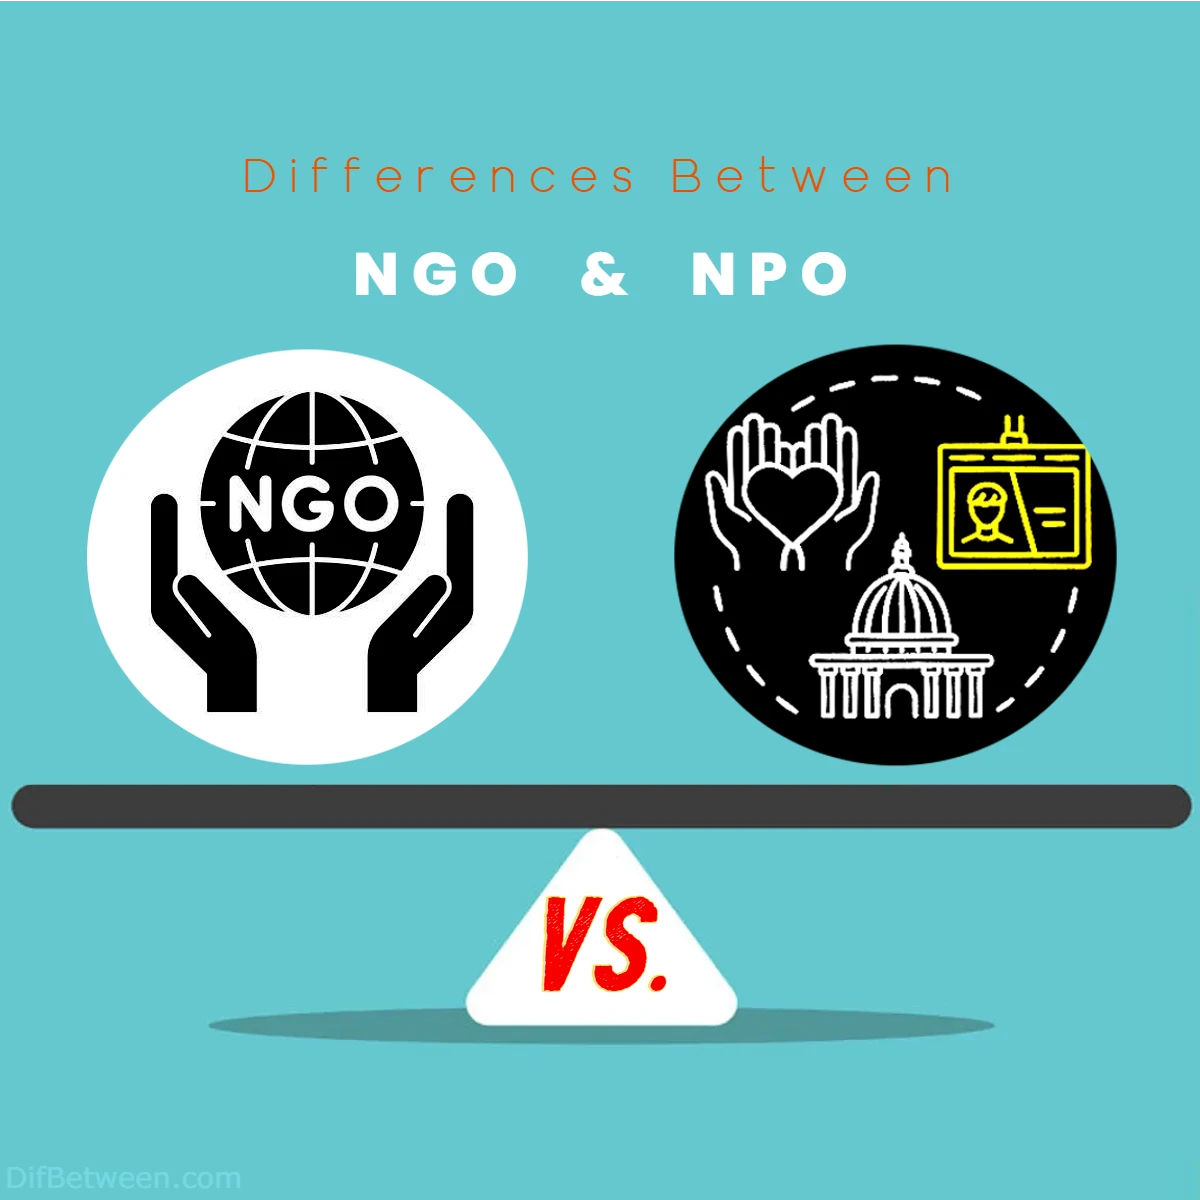 Differences Between NGO vs NPO